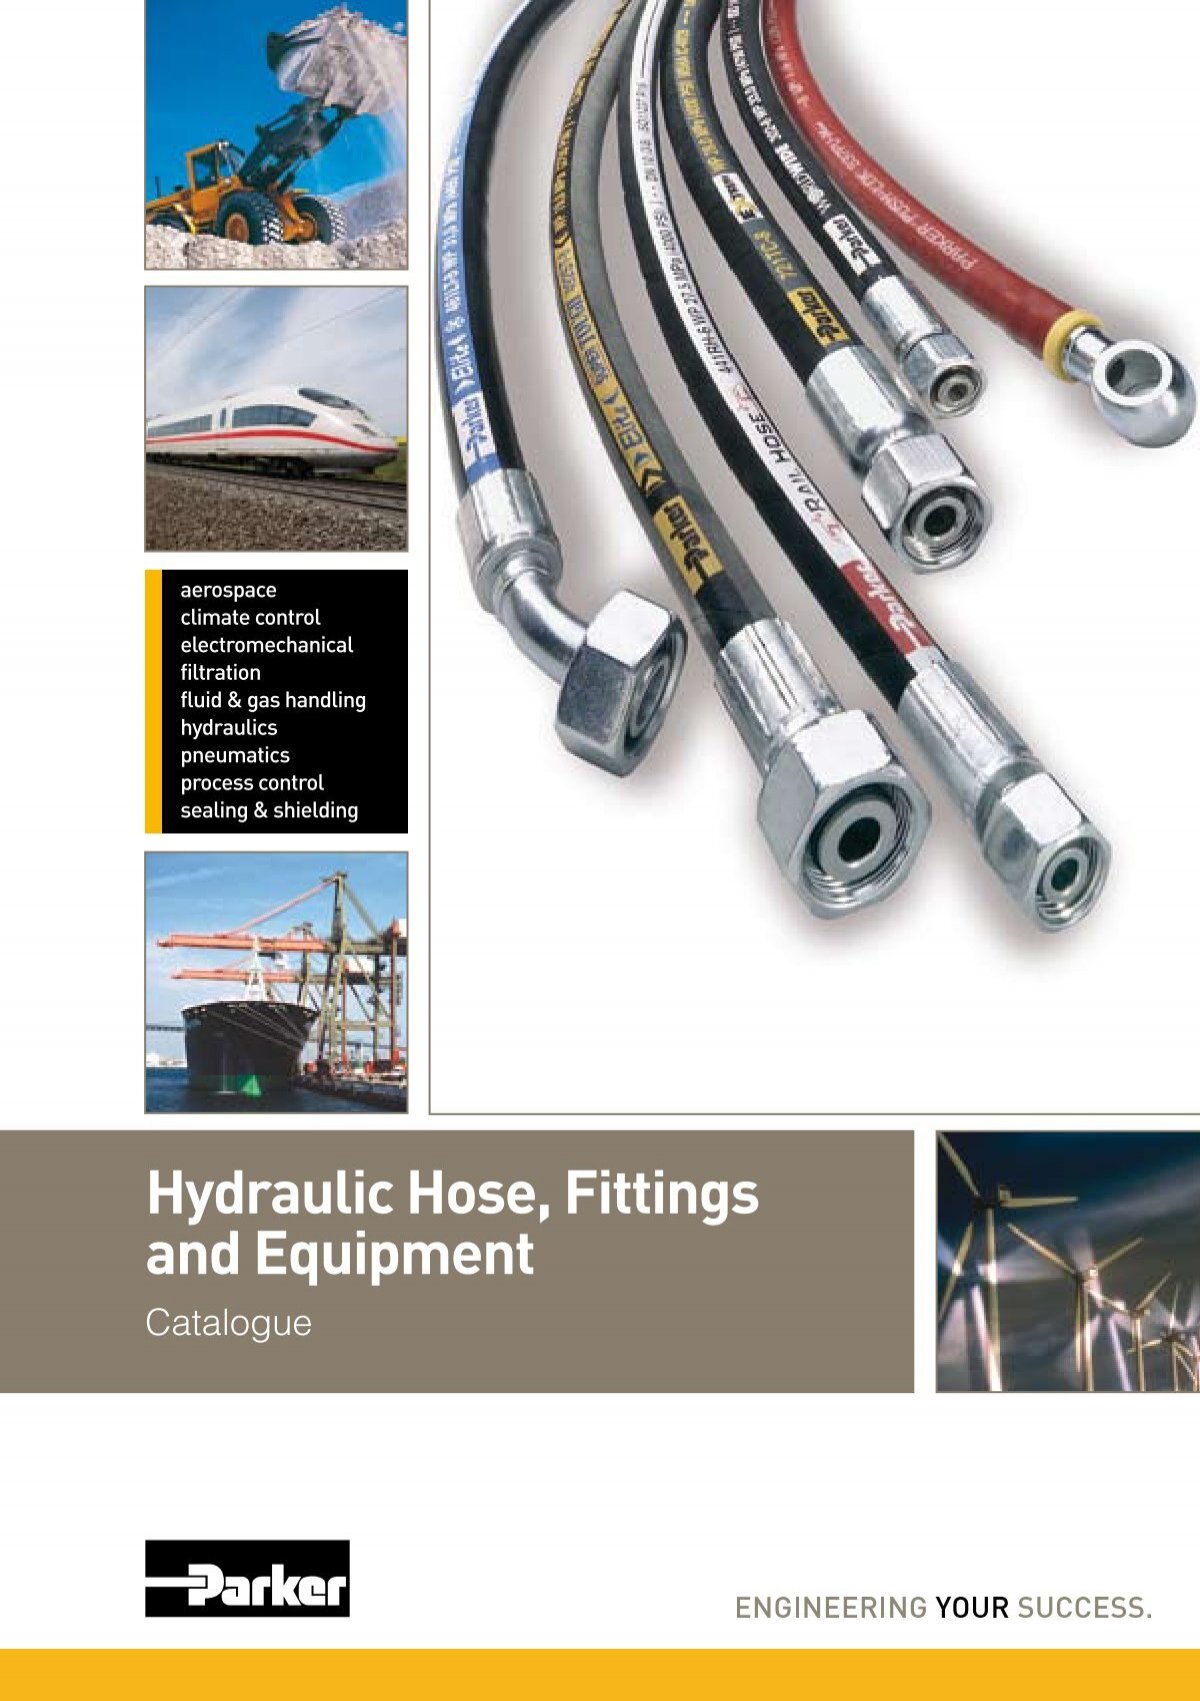 Hydraulic Hose, Fittings and Equipment - Longin Parkerstore